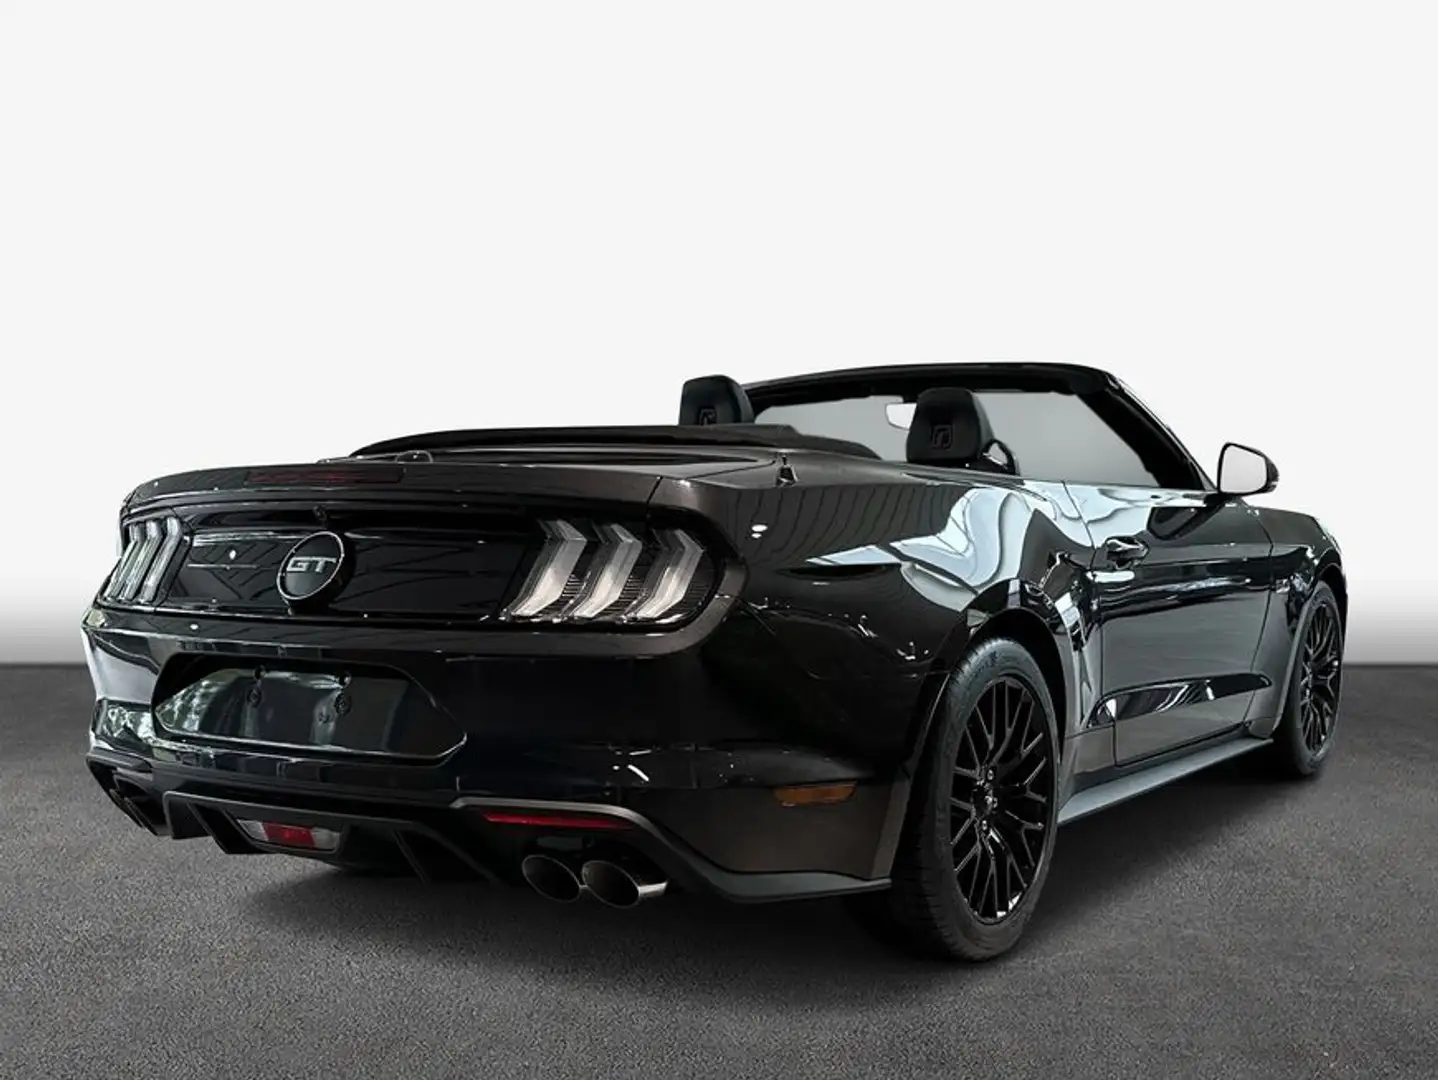 Ford Mustang Convertible 5.0 Ti-VCT V8 Aut. GT 330 kW, Grau - 2